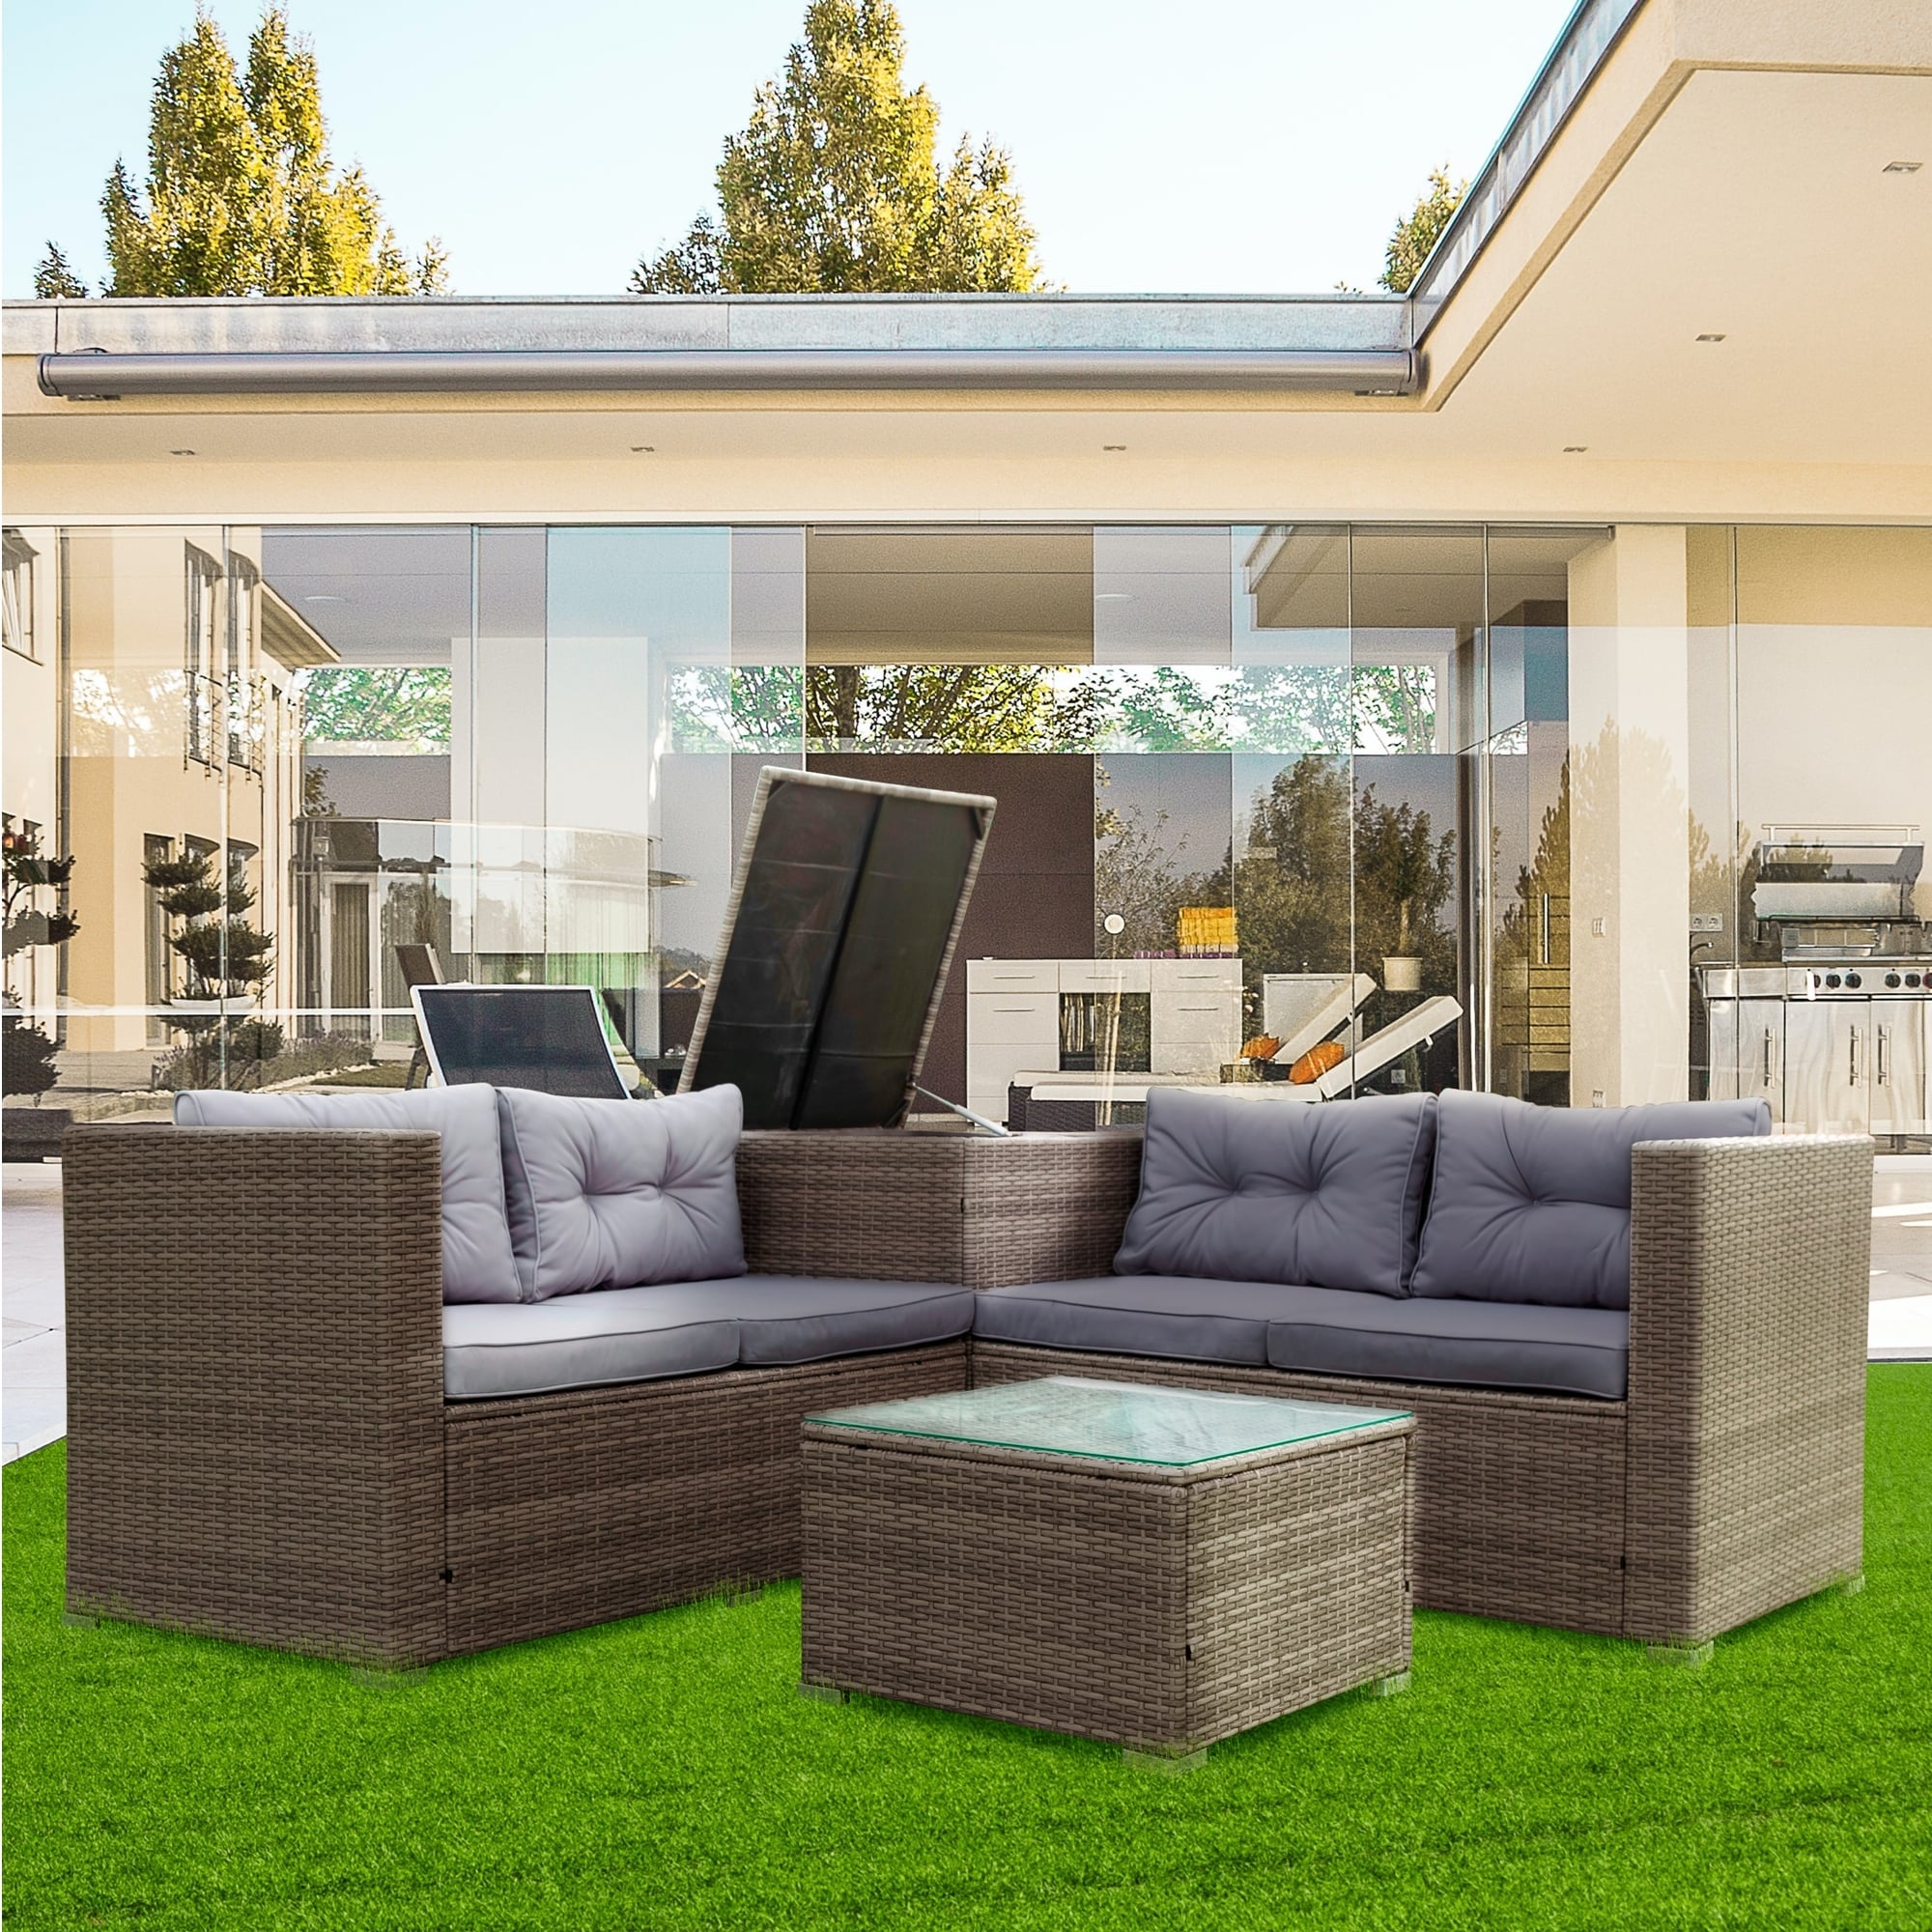 4-pieces Outdoor Garden Patio Furniture Sets For 4  Rattan Wicker Sectional Cushioned Sofa Sets With A Storage Box and Glass Table